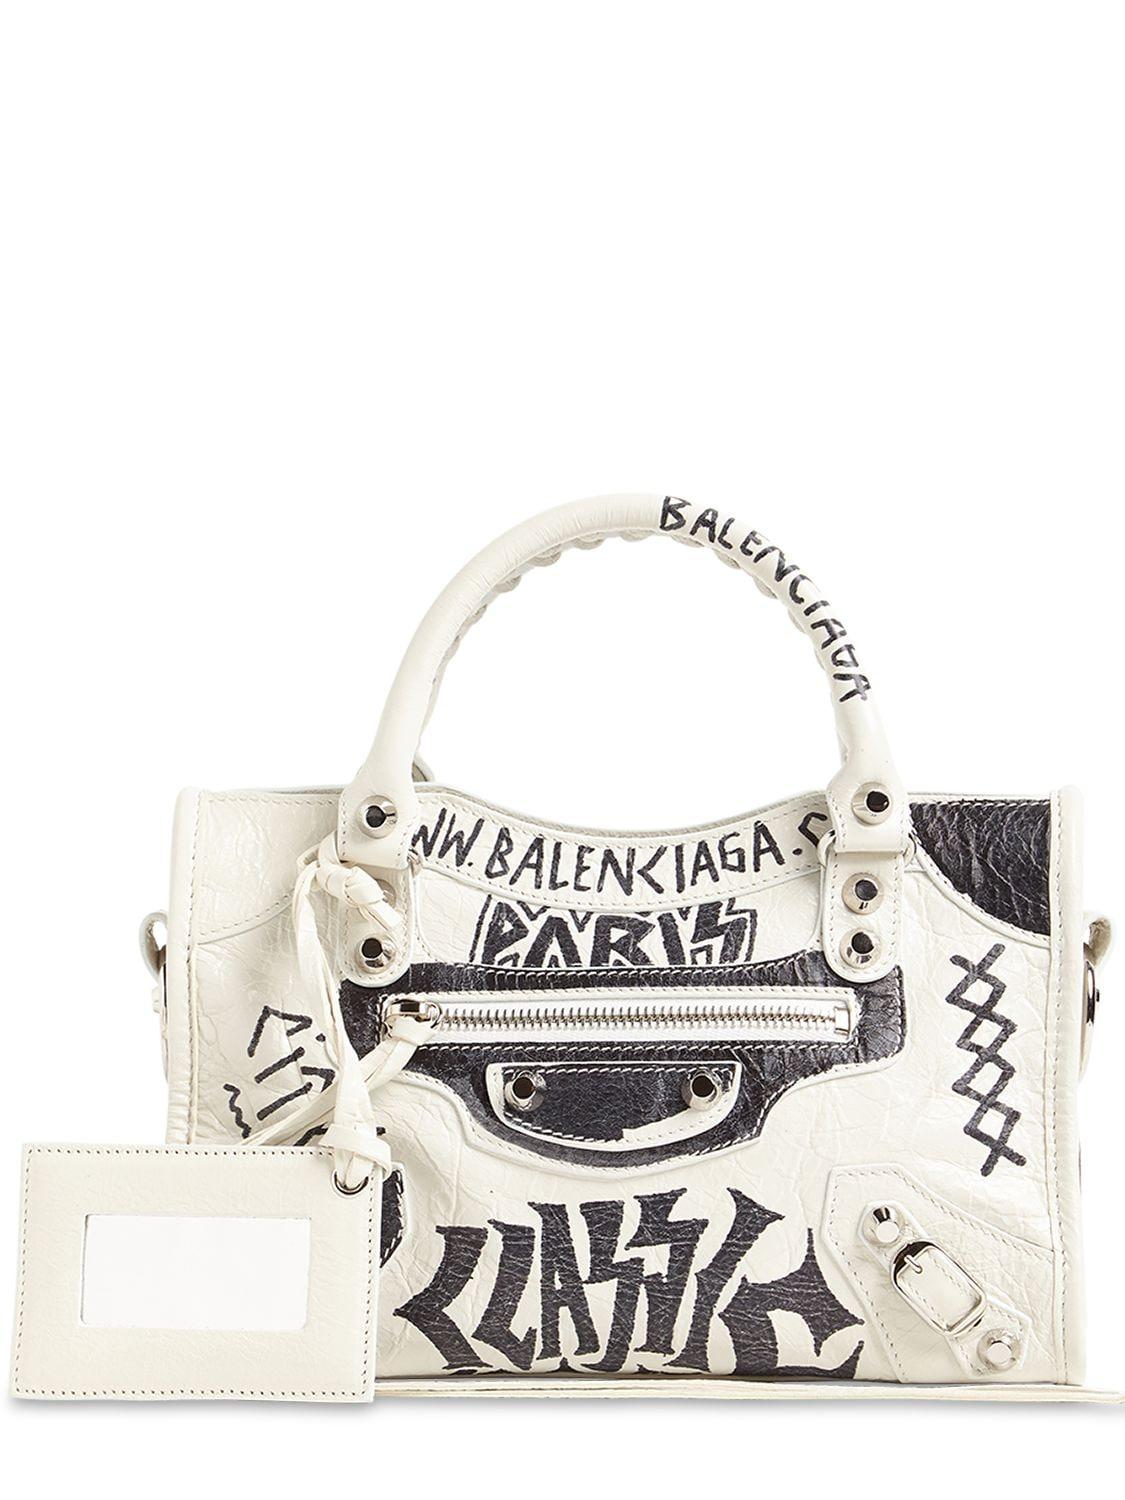 Shopping Phone Pouch Leather Tote in White  Balenciaga  Mytheresa